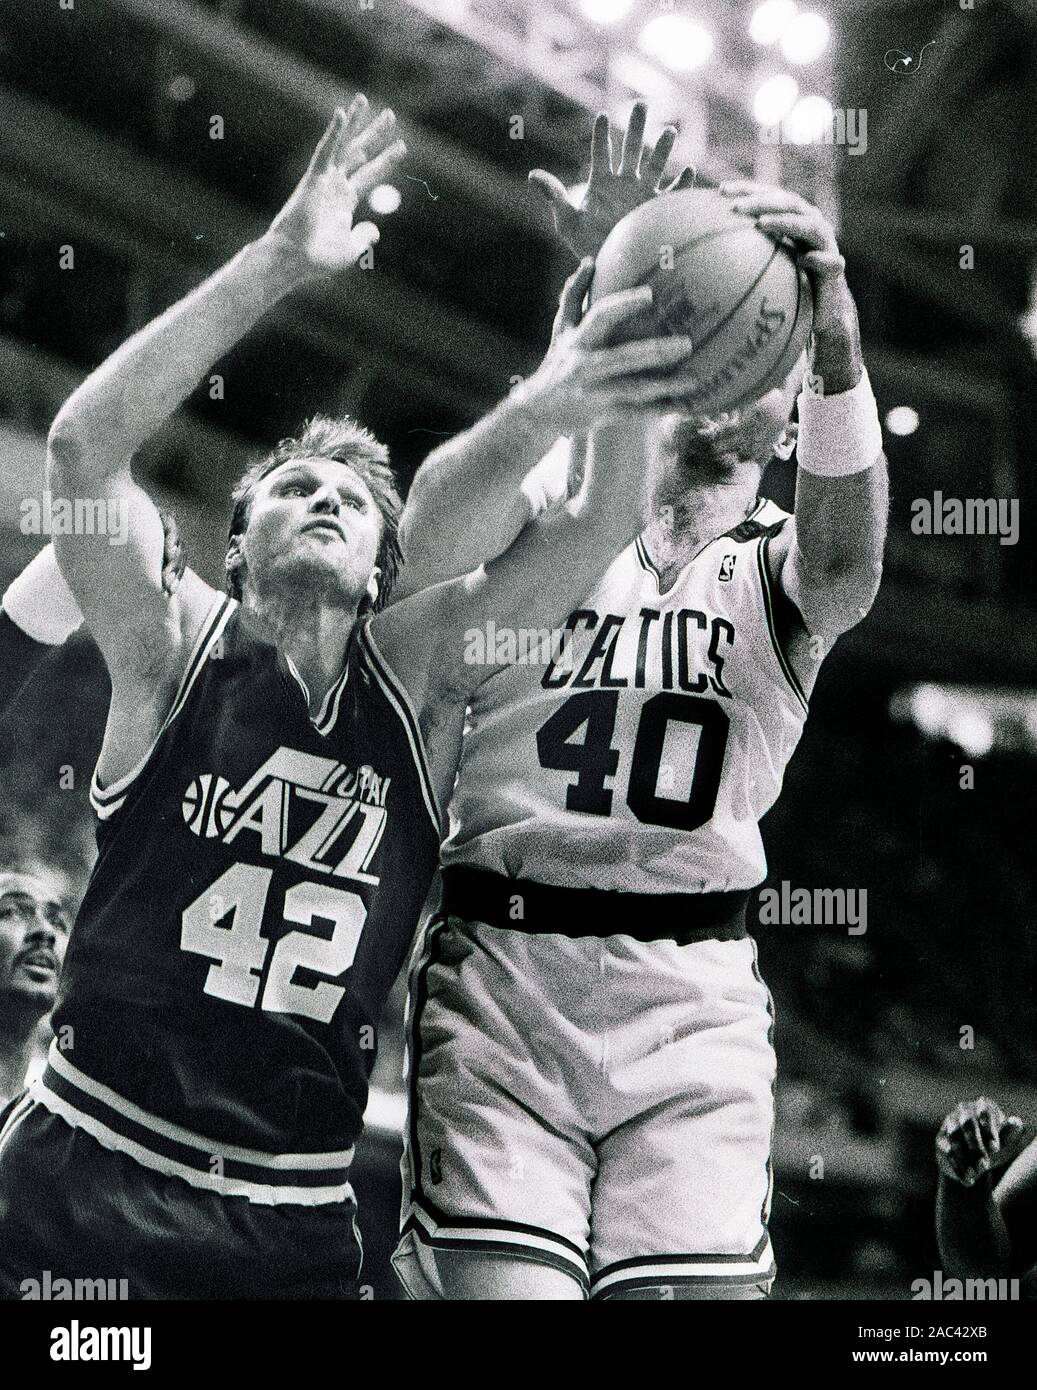 Utah Jazz #42 Tom Chambers being fouled while defending against Boston Celtics Dino Rada in basketball game action at the Fleet Center in Boston Ma USA Dec 17,1993 photo by bill belknap Stock Photo